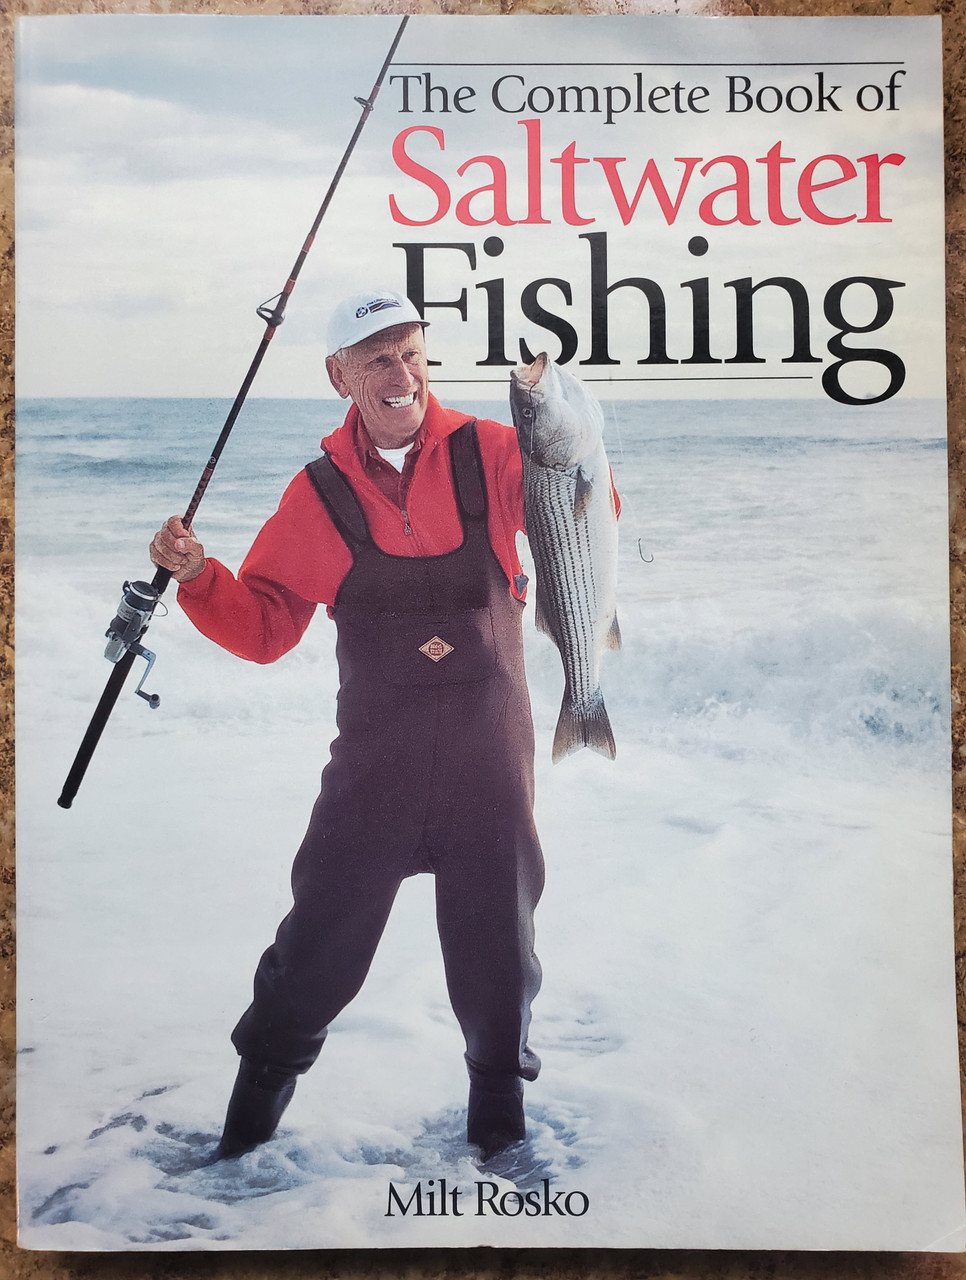 Complete Book of Saltwater Fishing by Milt Rosko - NYCeFISHING